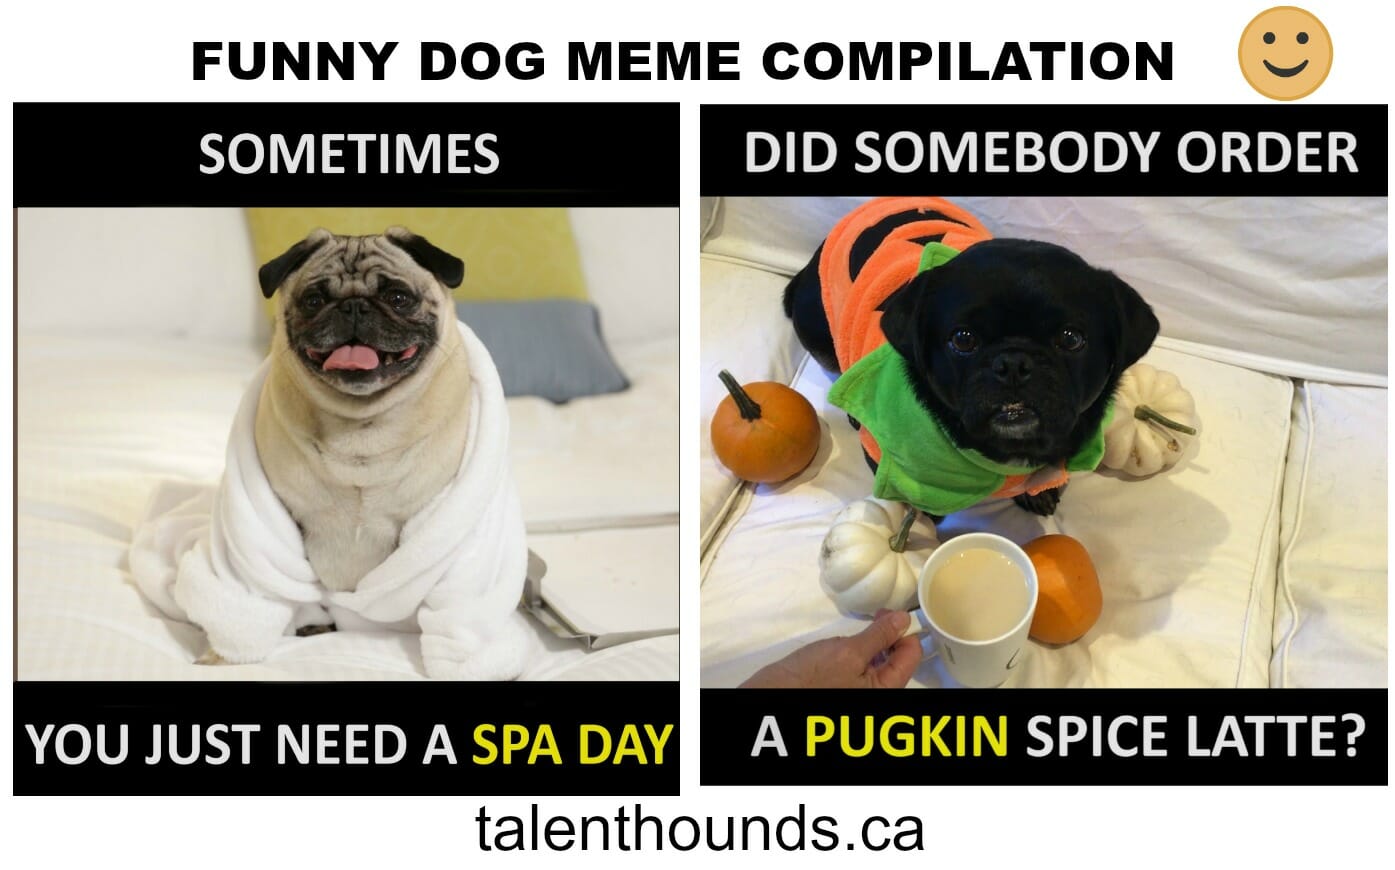 Try Not to Laugh at this Funny Dog Meme Compilation Video - Talent Hounds